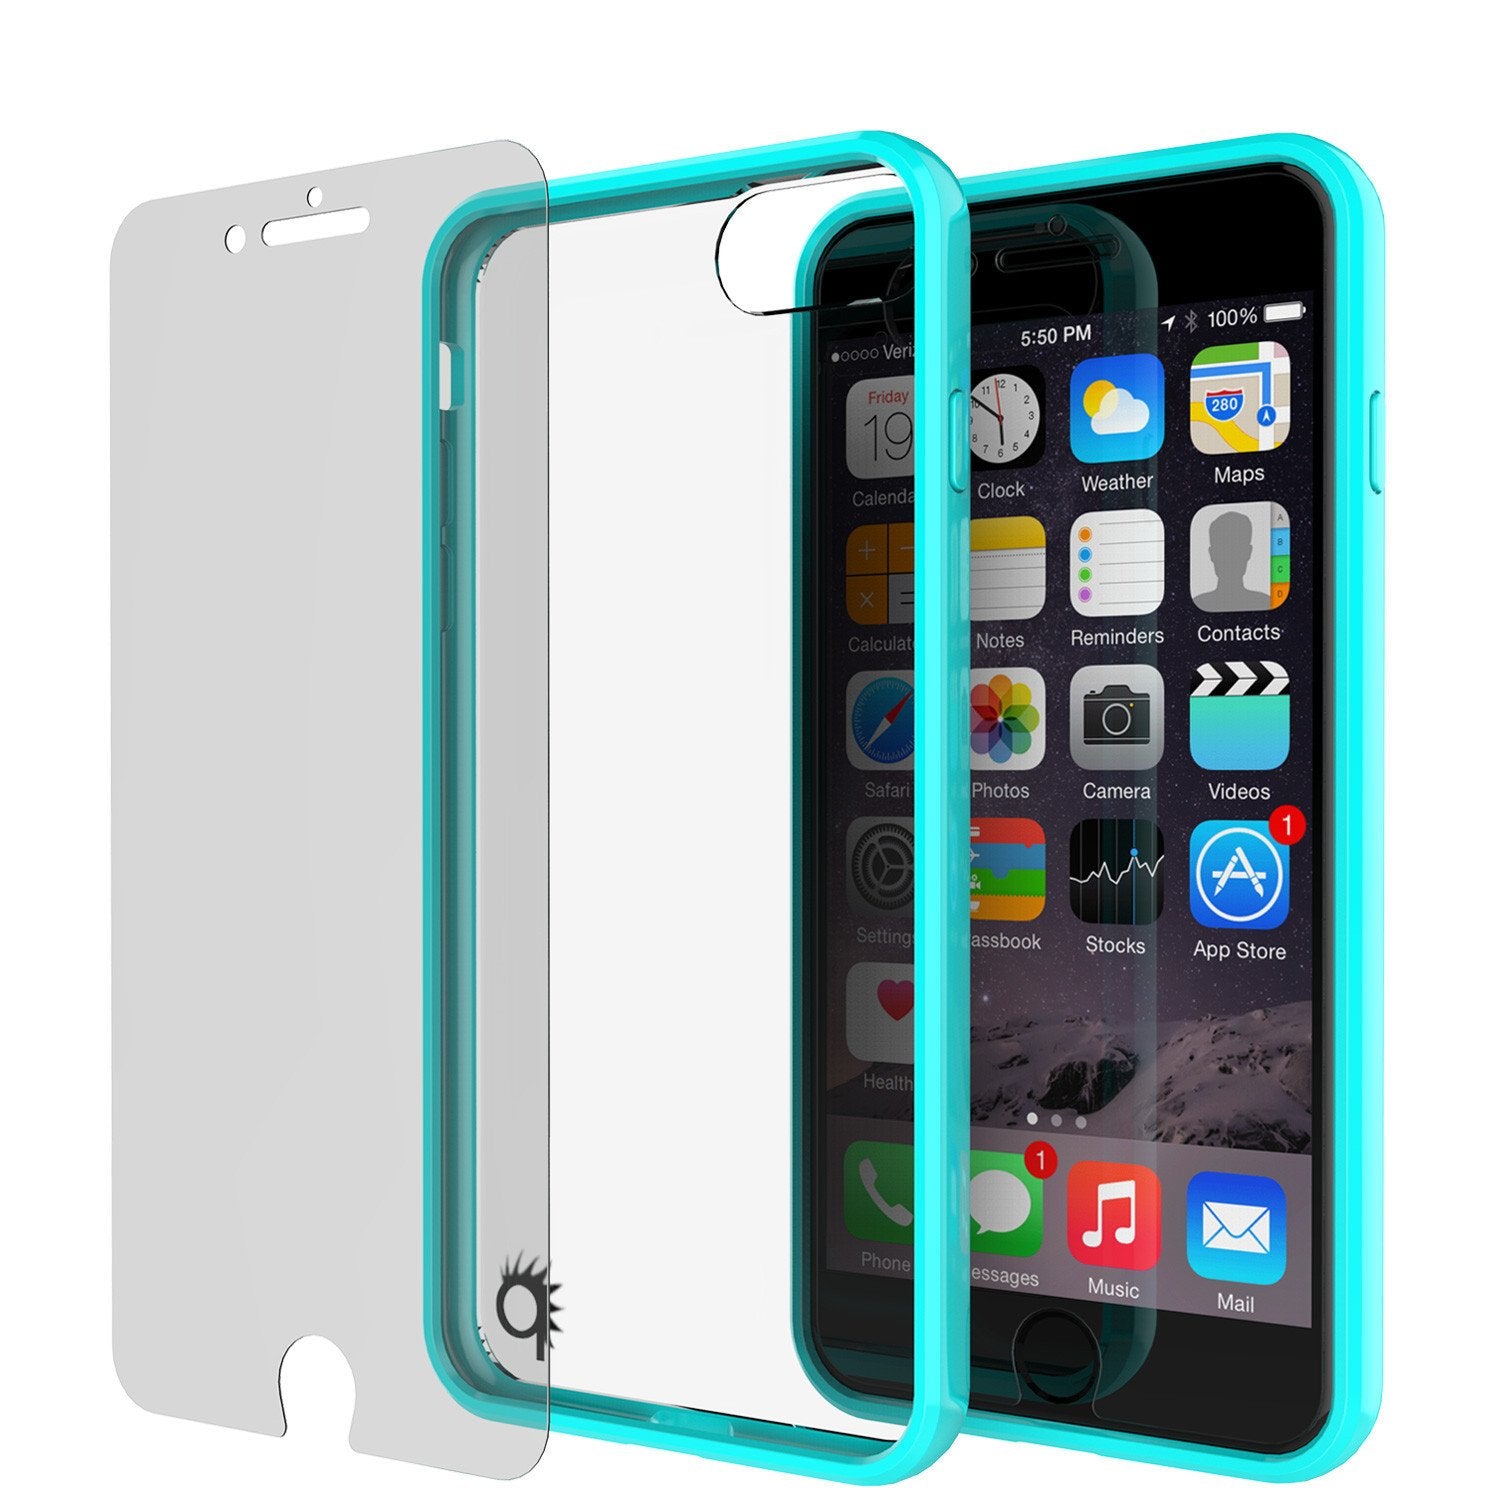 iPhone 7+ Plus Case Punkcase® LUCID 2.0 Teal Series w/ PUNK SHIELD Screen Protector | Ultra Fit